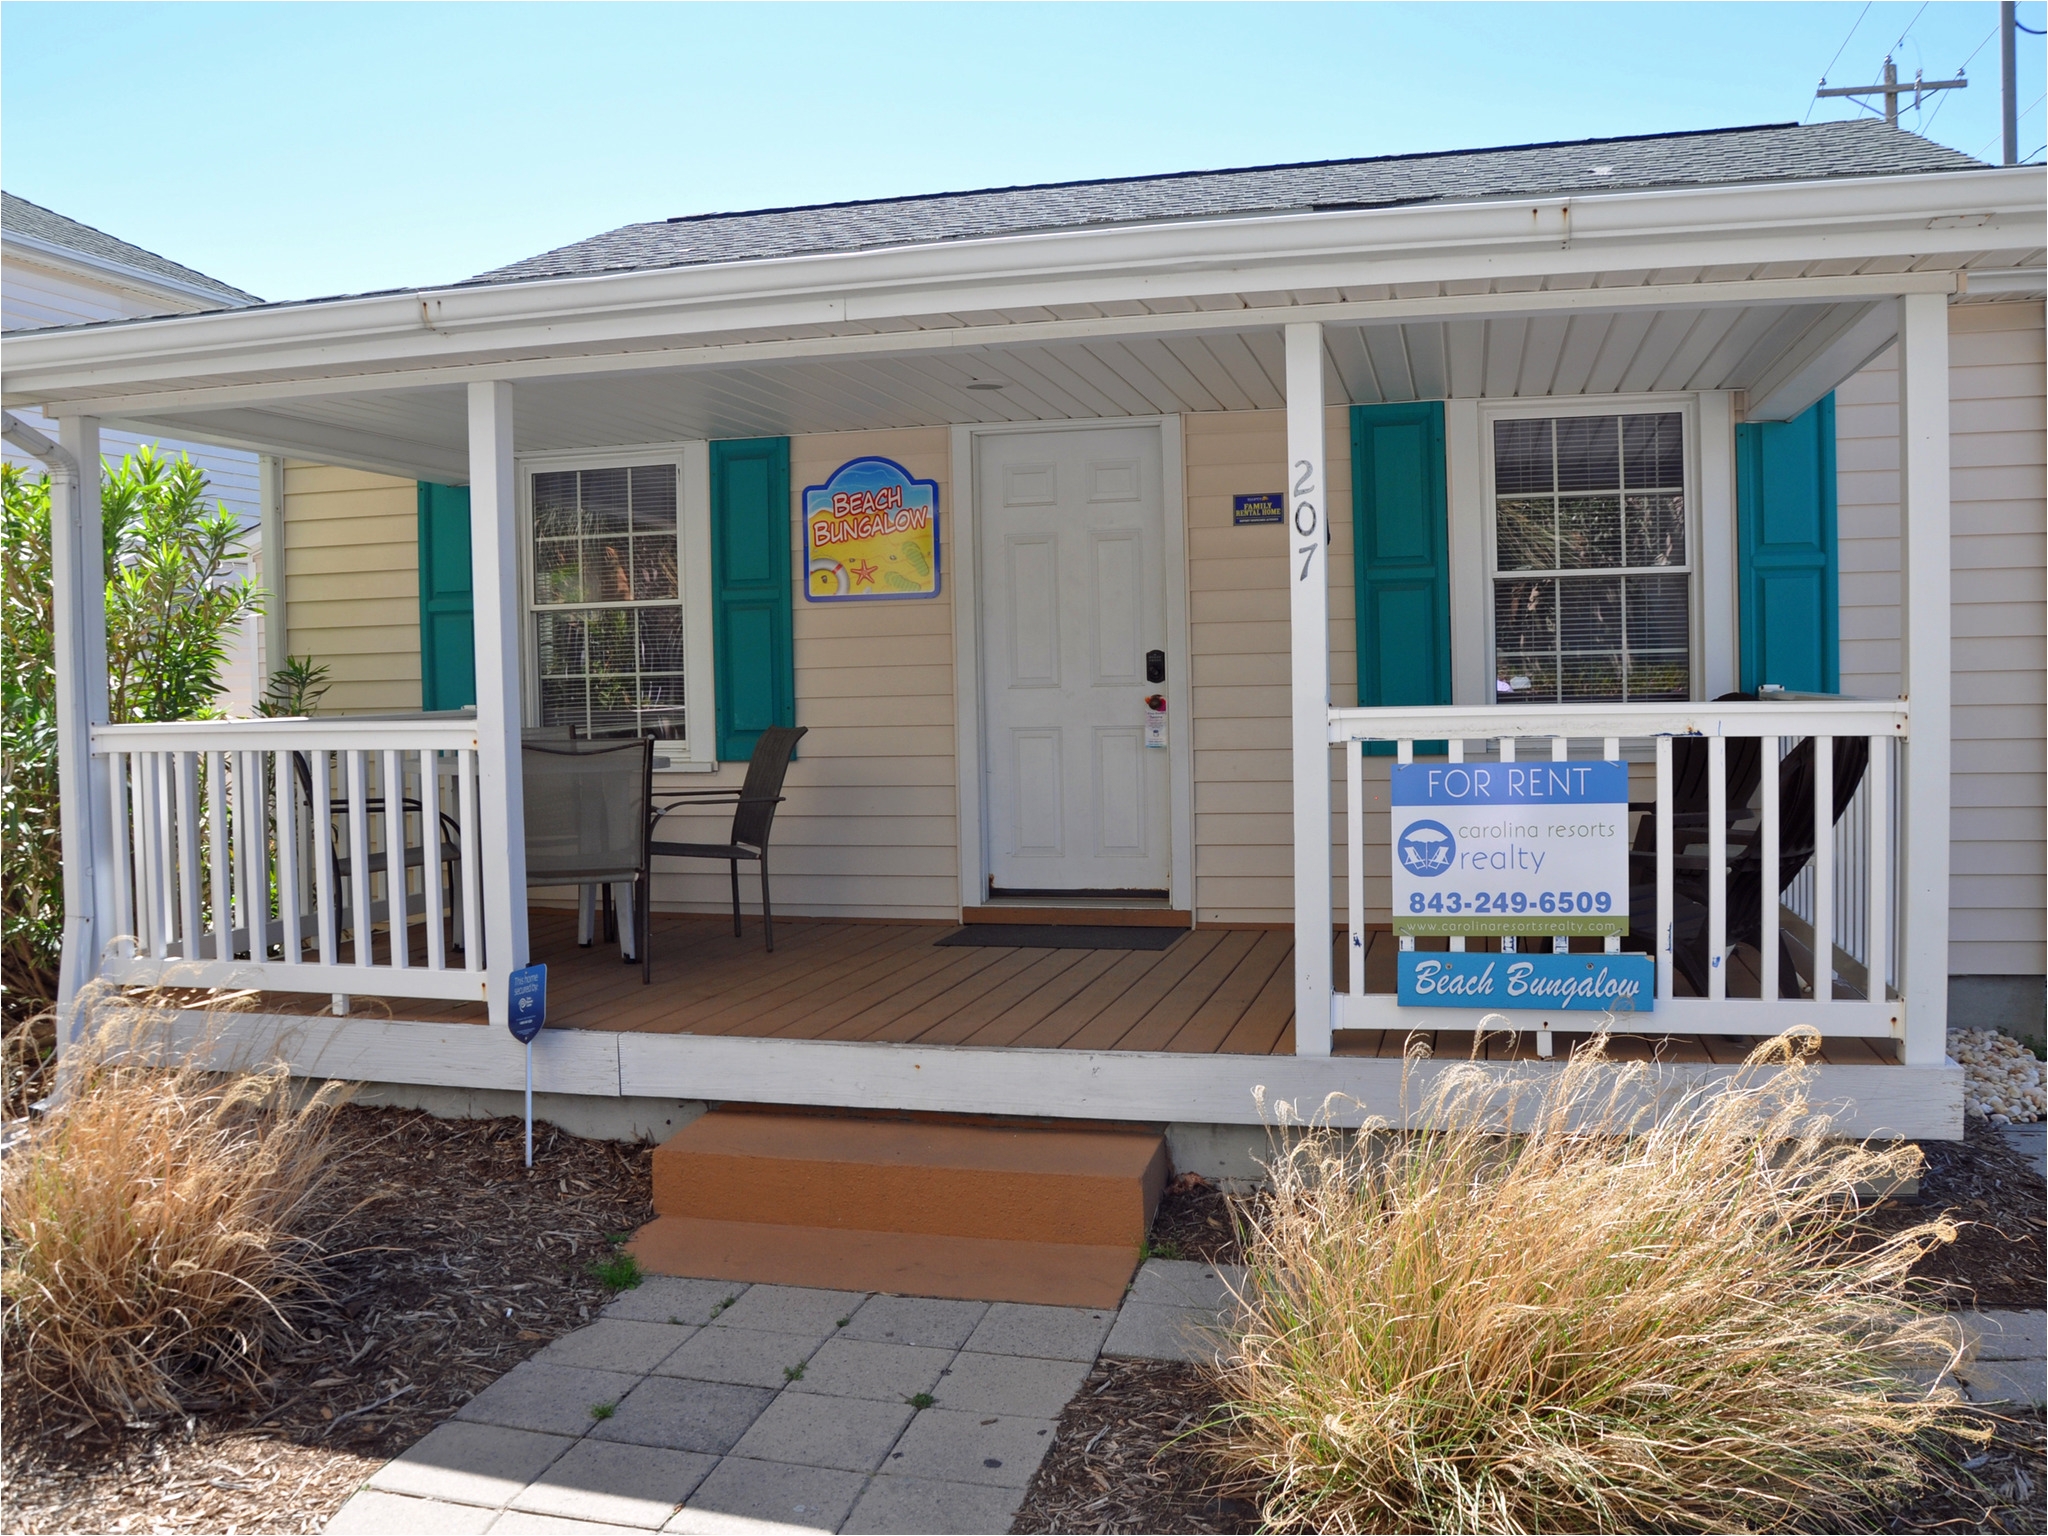 beach bungalow north myrtle beach sc vacation rentals by choice hotelsa¢